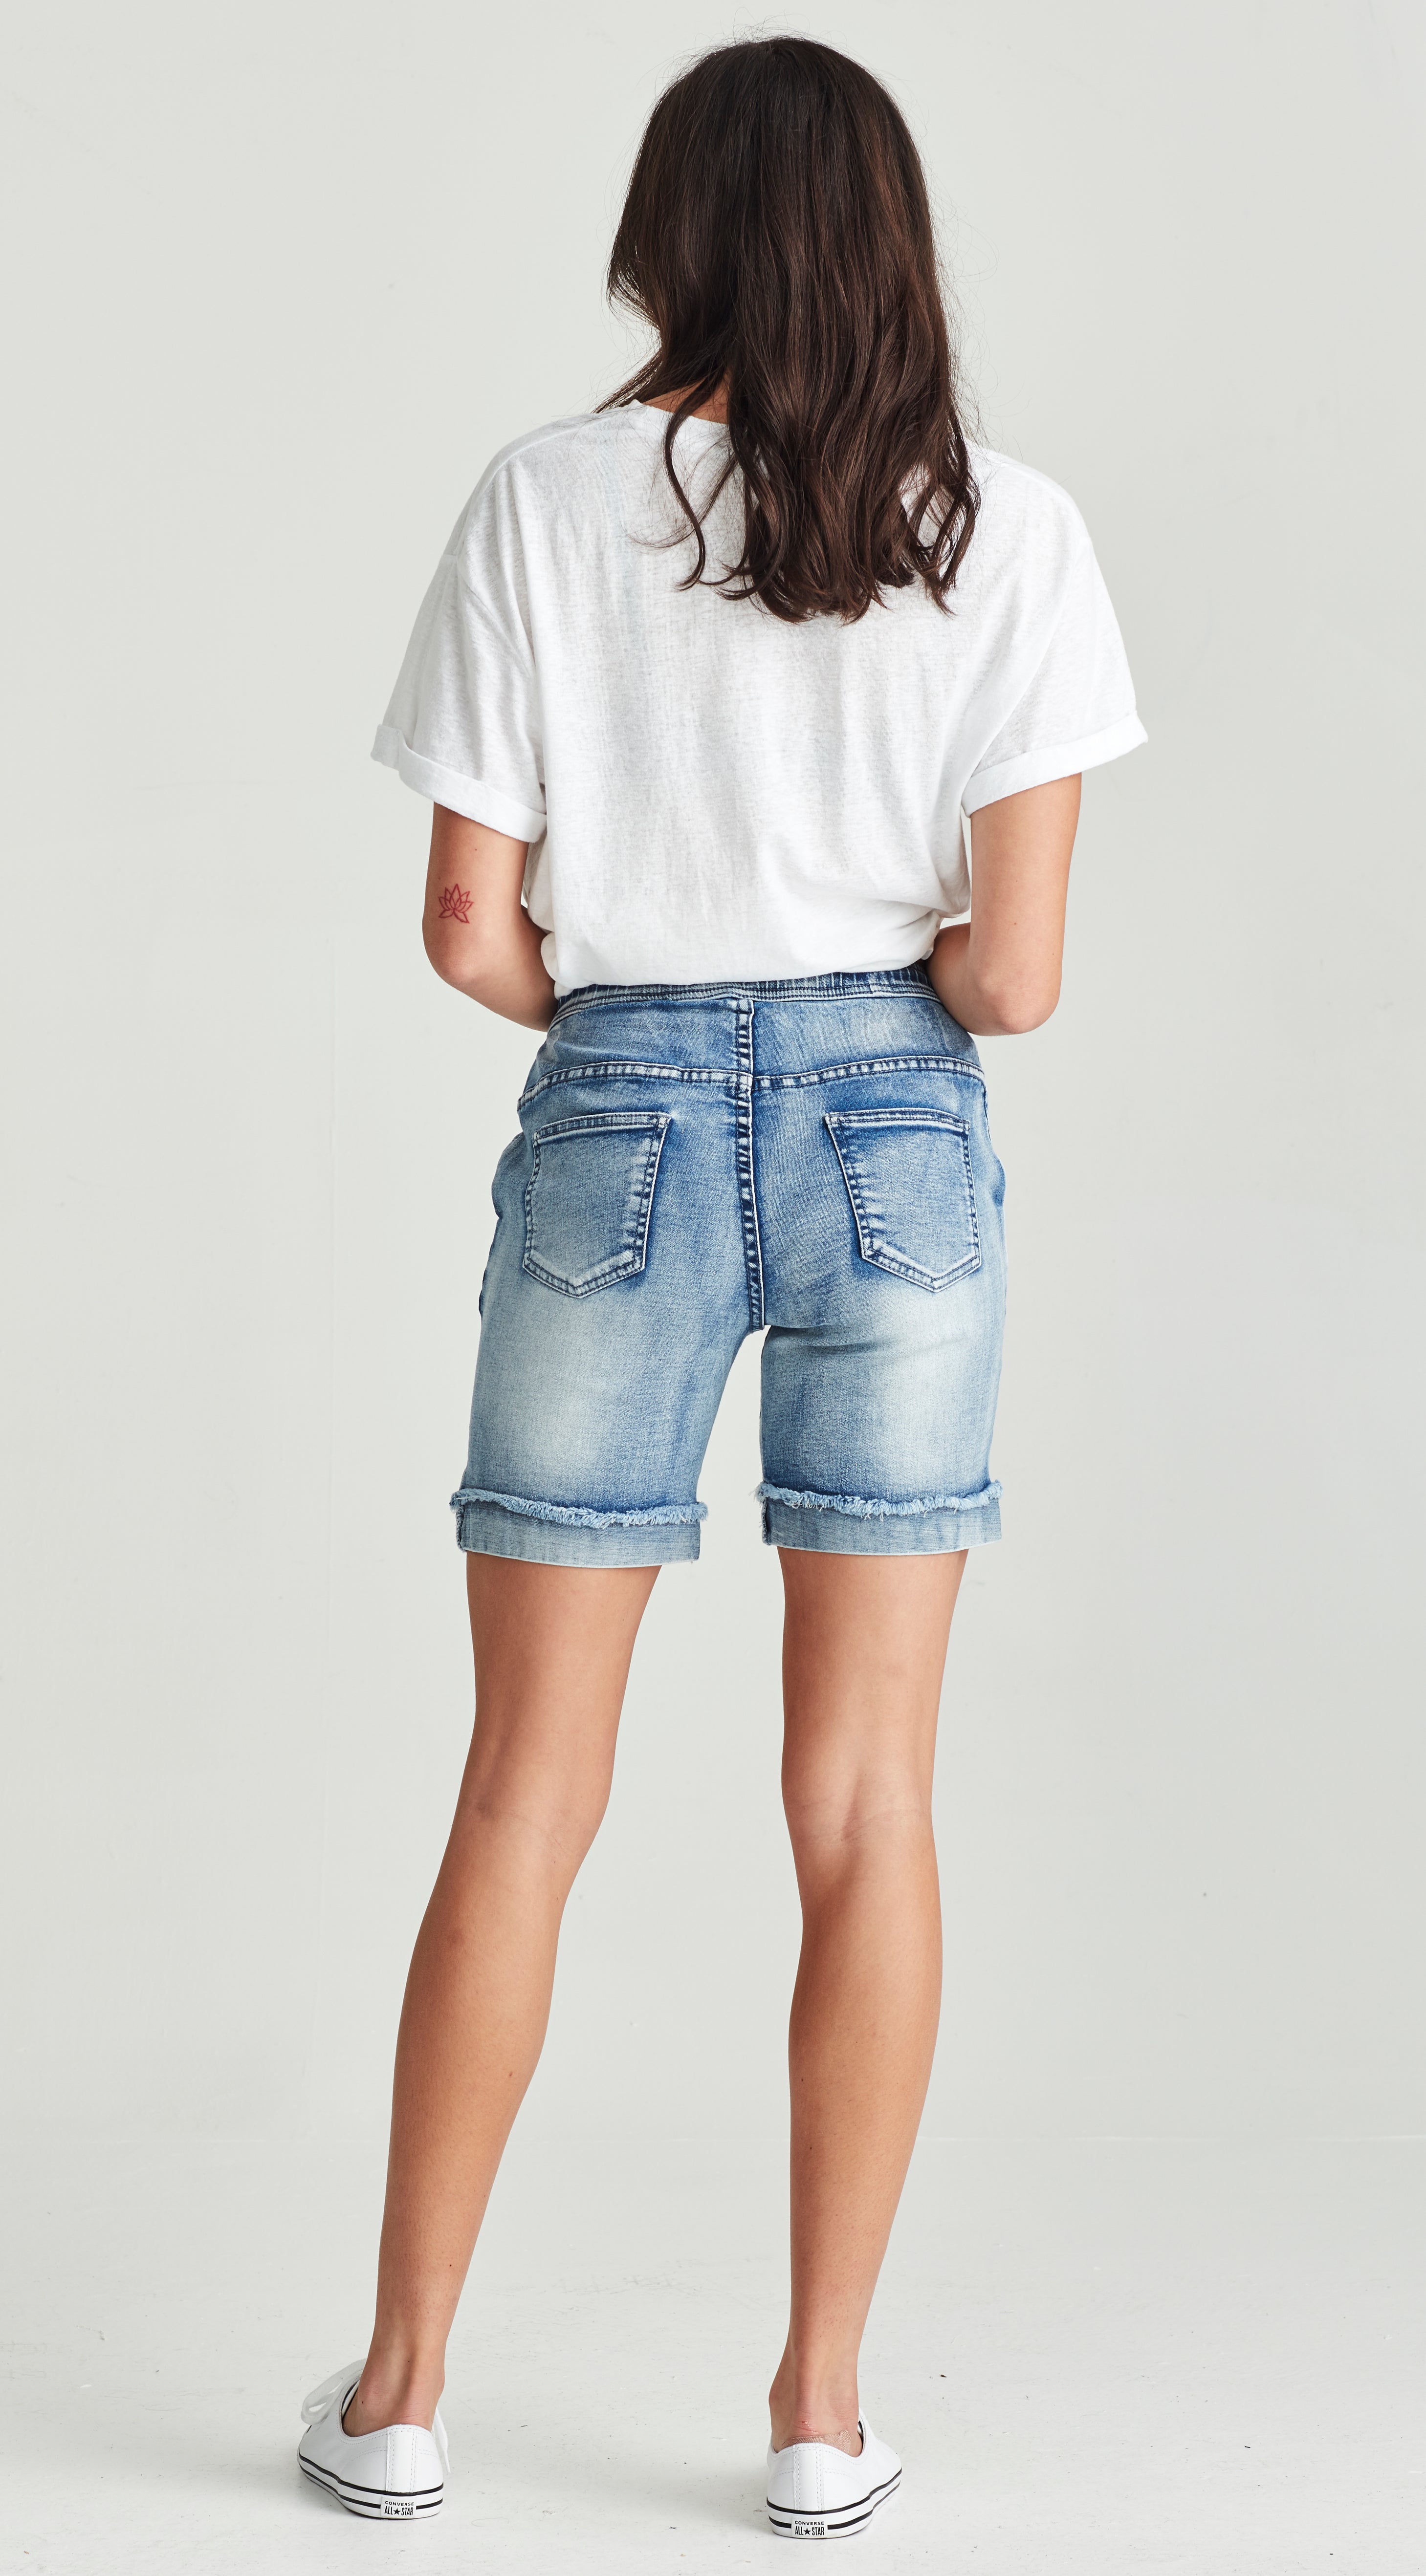 KIMMY | Shorts Soft Pale Blue – junkfoodjeans